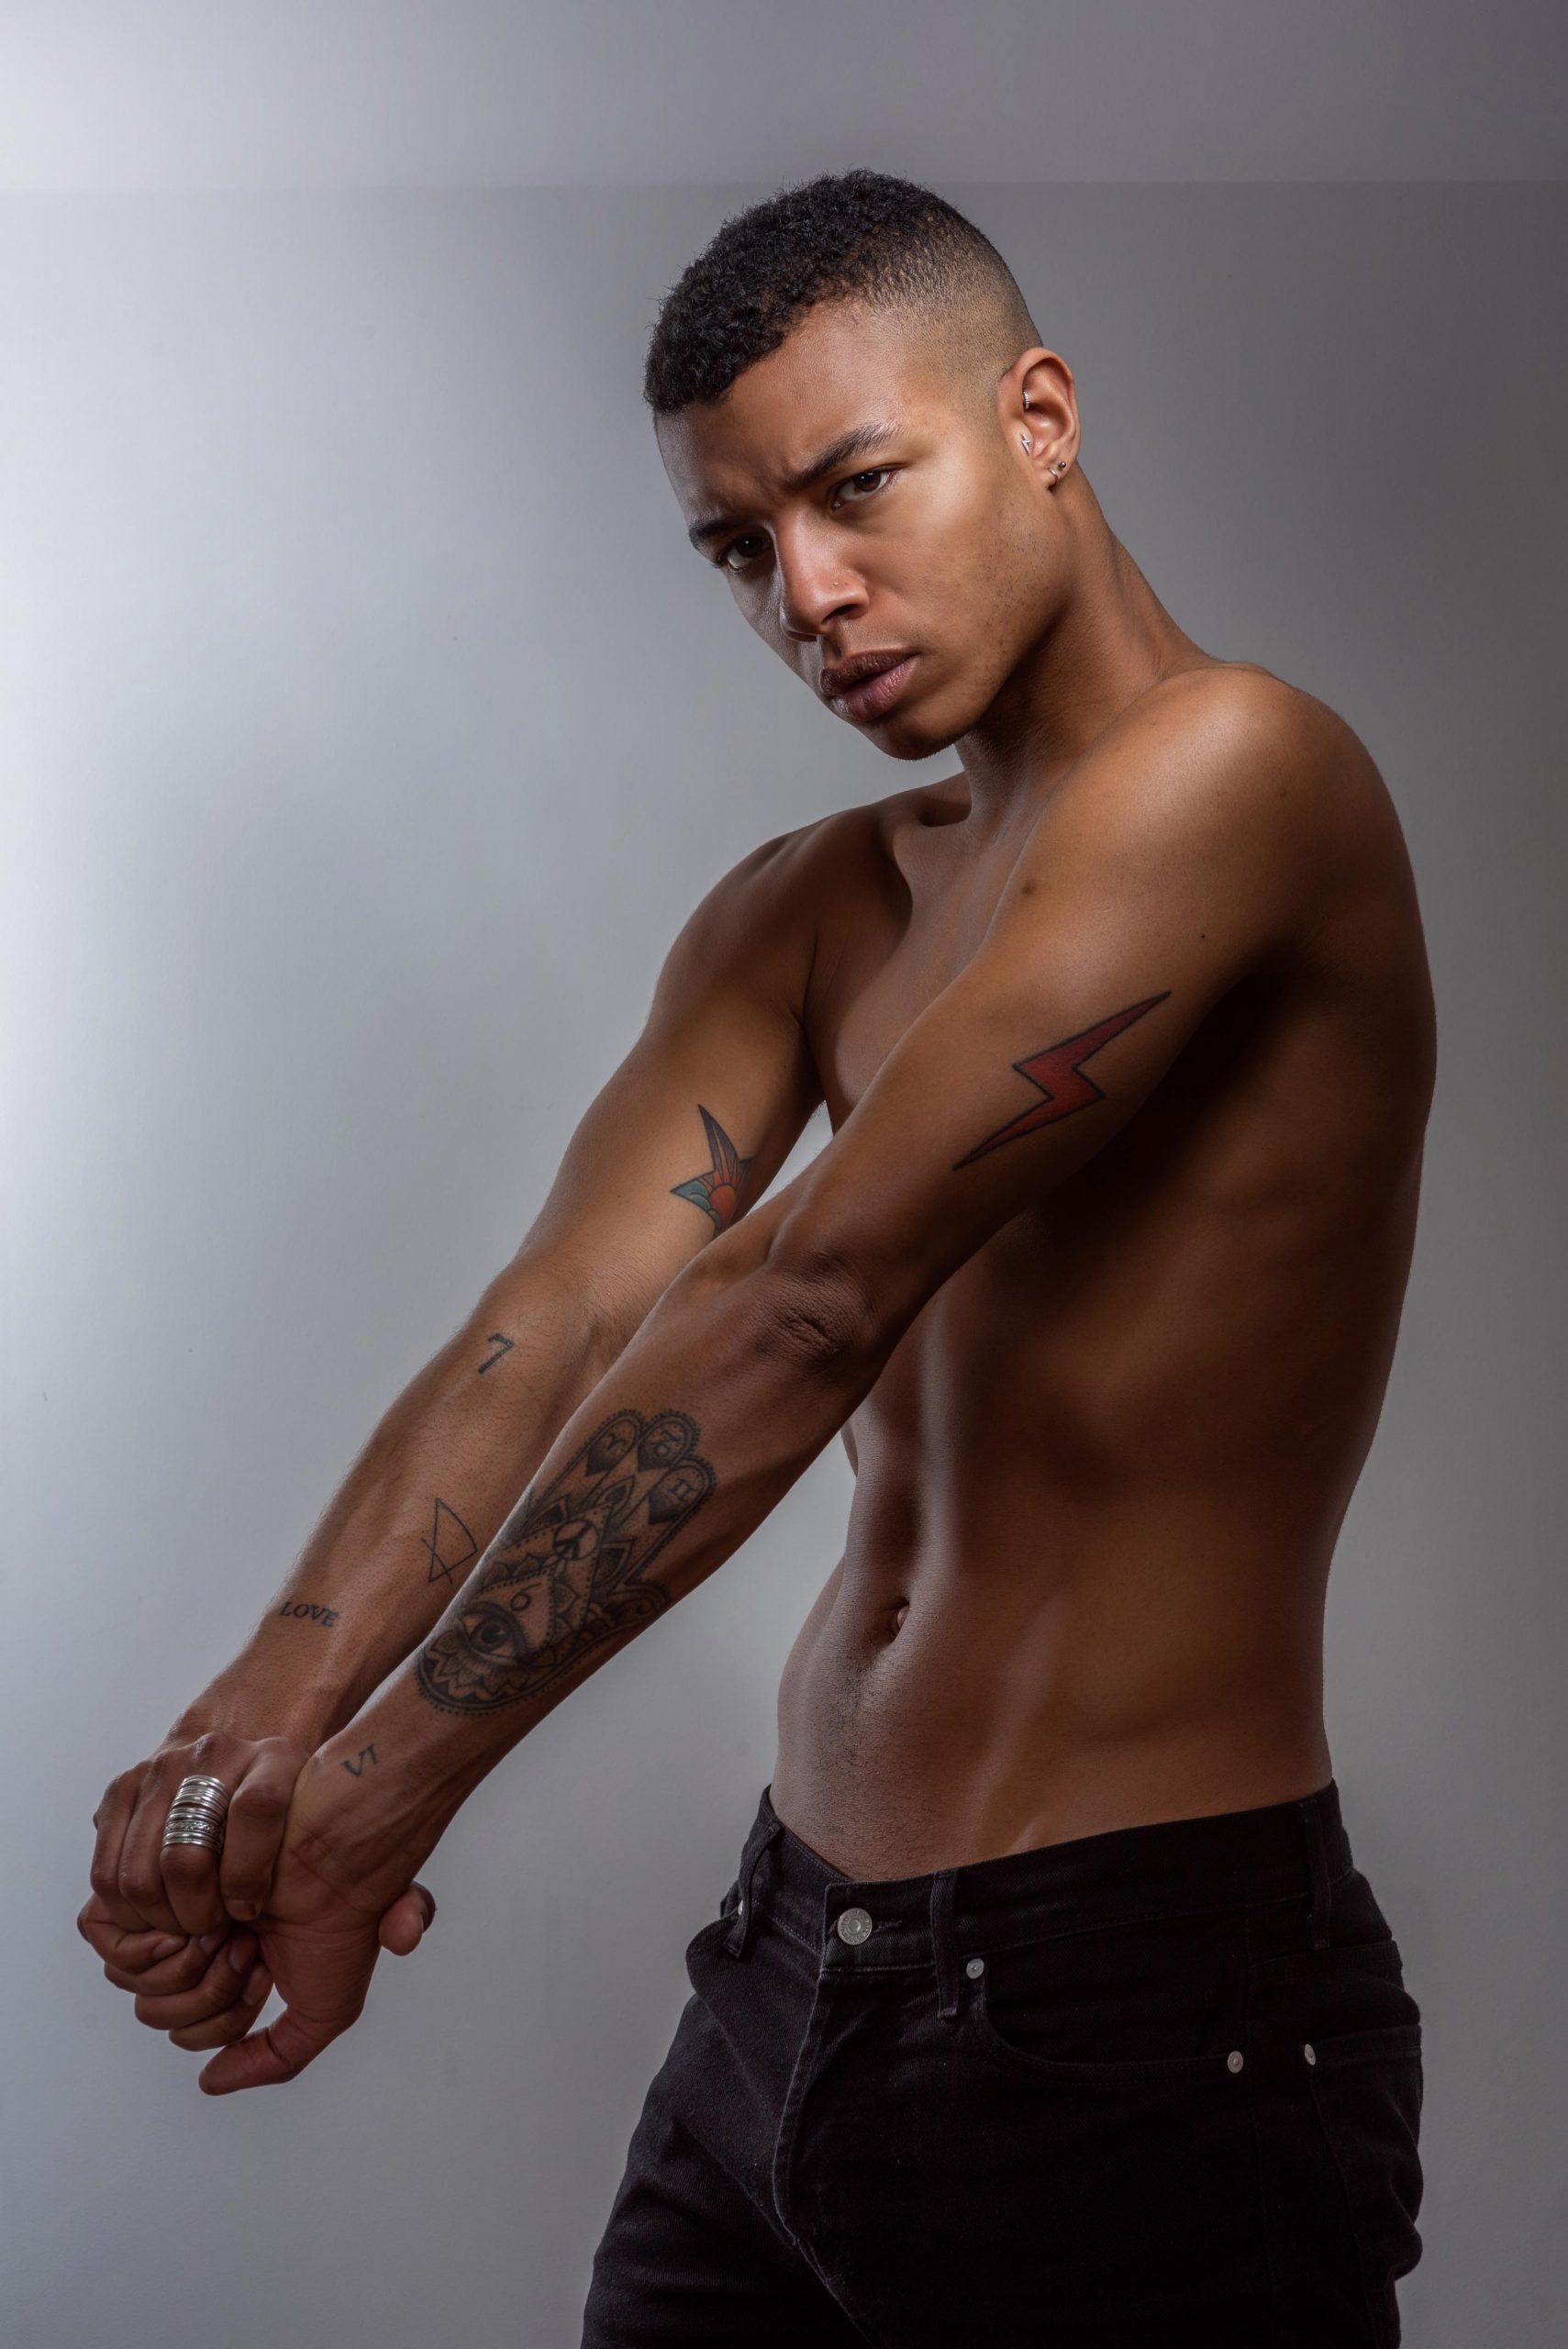 A shirtless model poses in the studio with hands clasped out in front. He tilts his head and wears a serious expression, showcasing his golden brown skin adorned with tattoos.